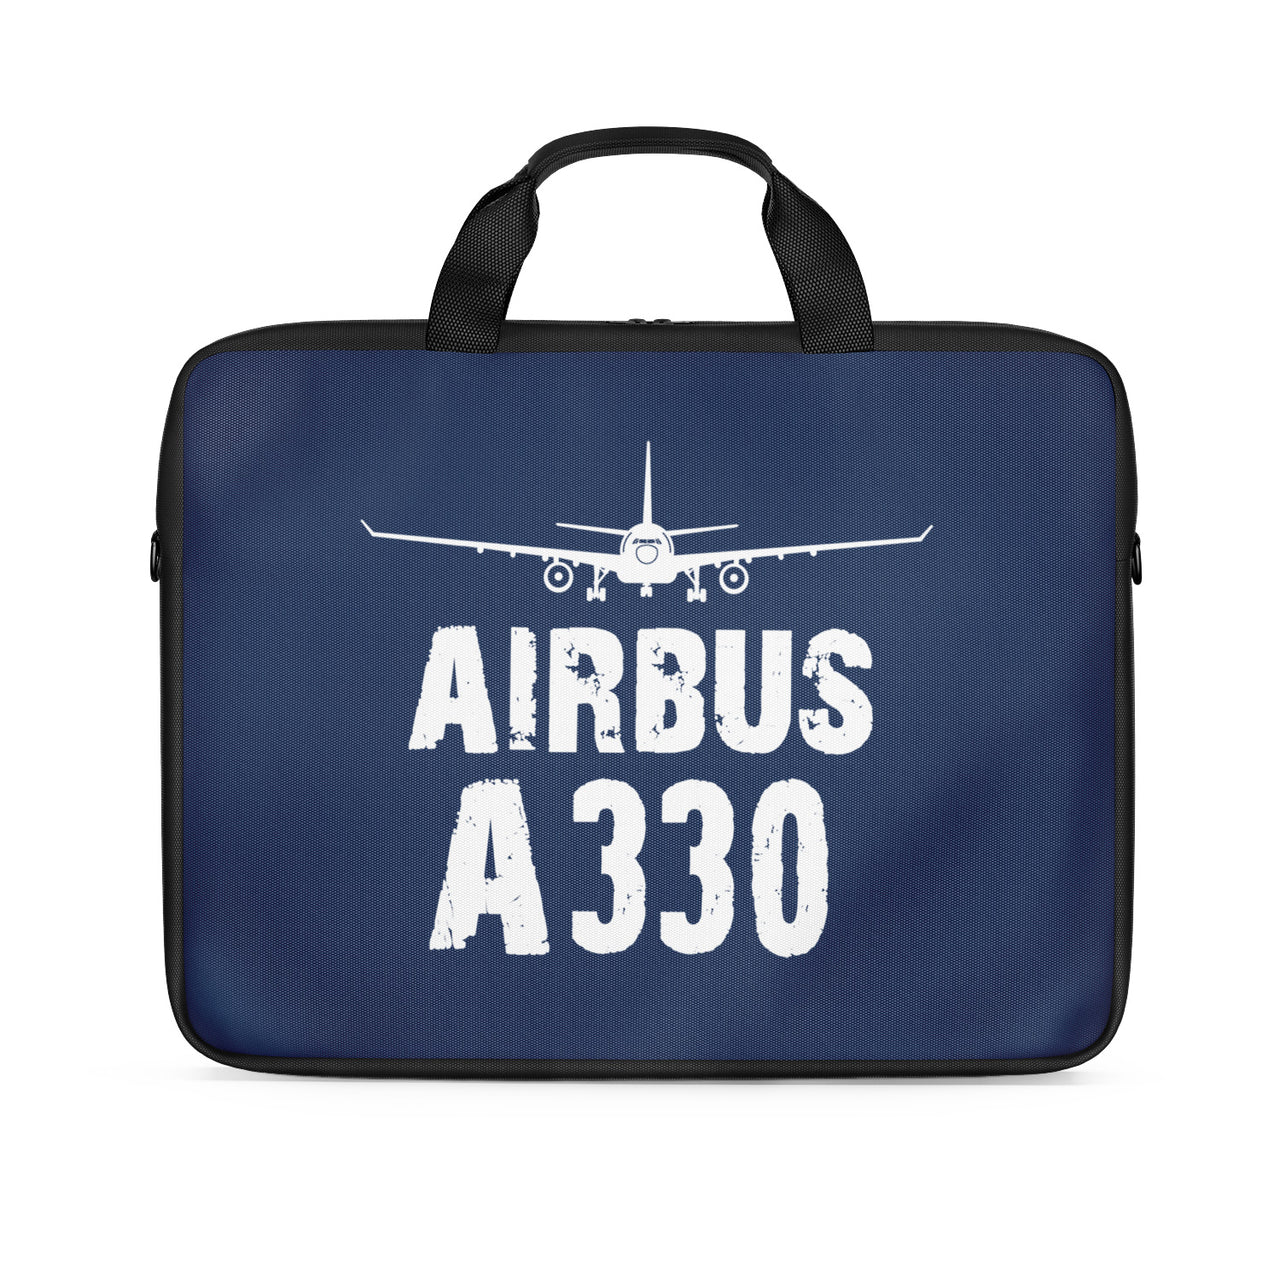 Airbus A330 & Plane Designed Laptop & Tablet Bags